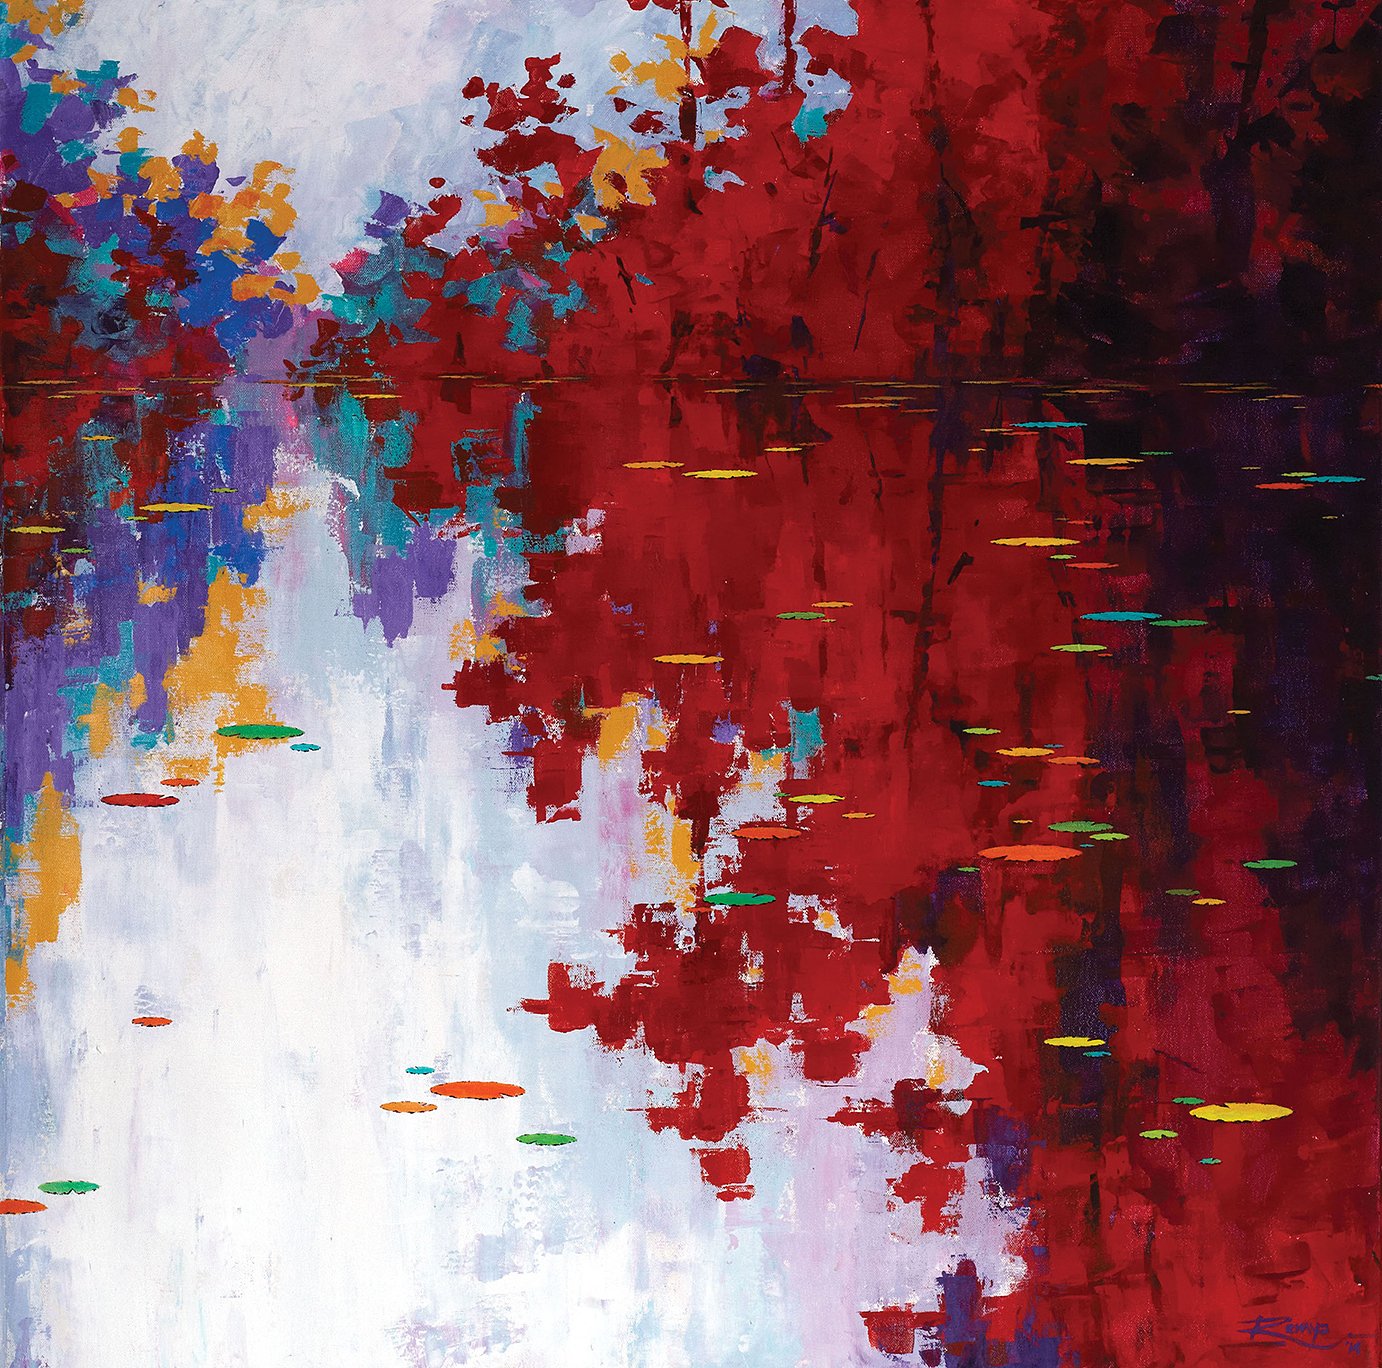 Speckled Waters|Remya Kumar- Acrylic on Canvas, 2014, 36 x 36  inches